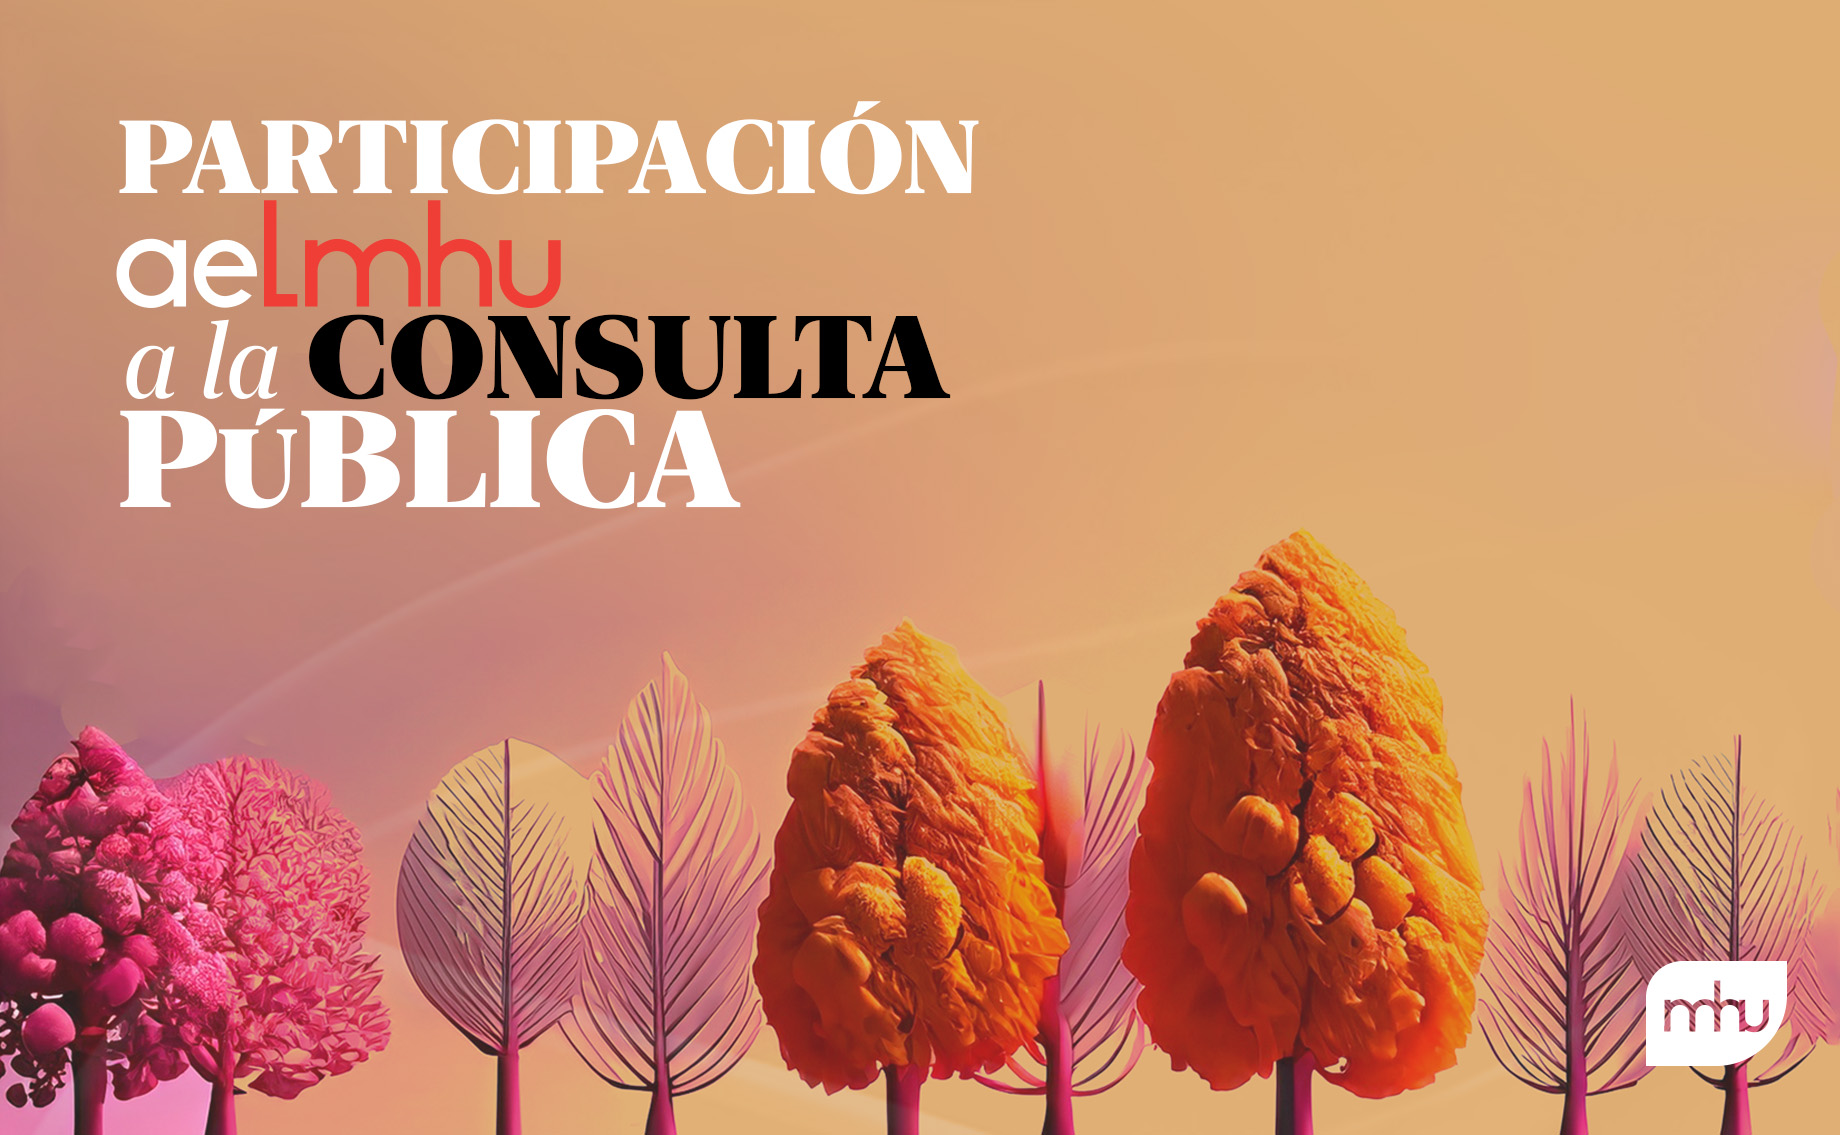 AELMHU contributions to the consultation of the Community of Madrid